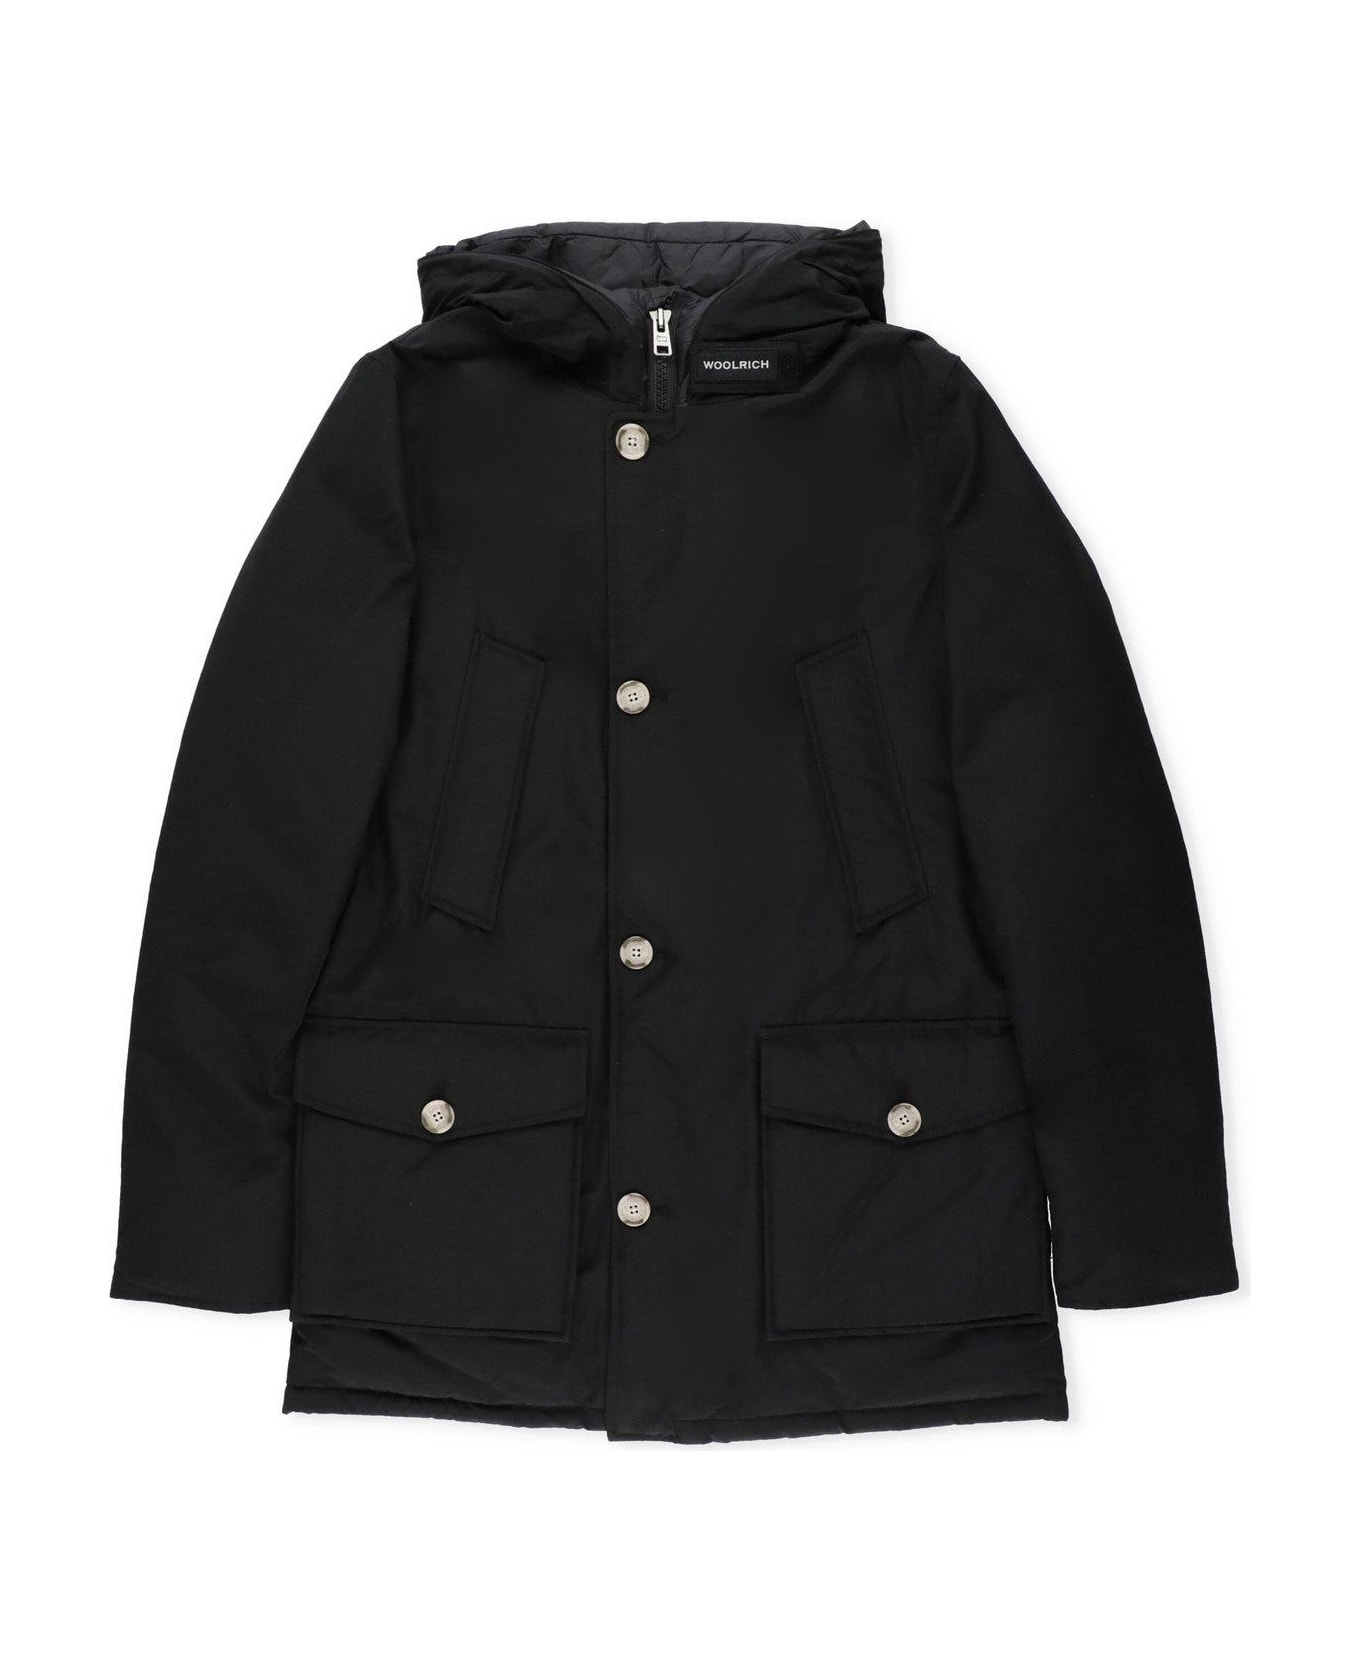 Woolrich Buttoned Long-sleeved Padded Coat - Blk Black